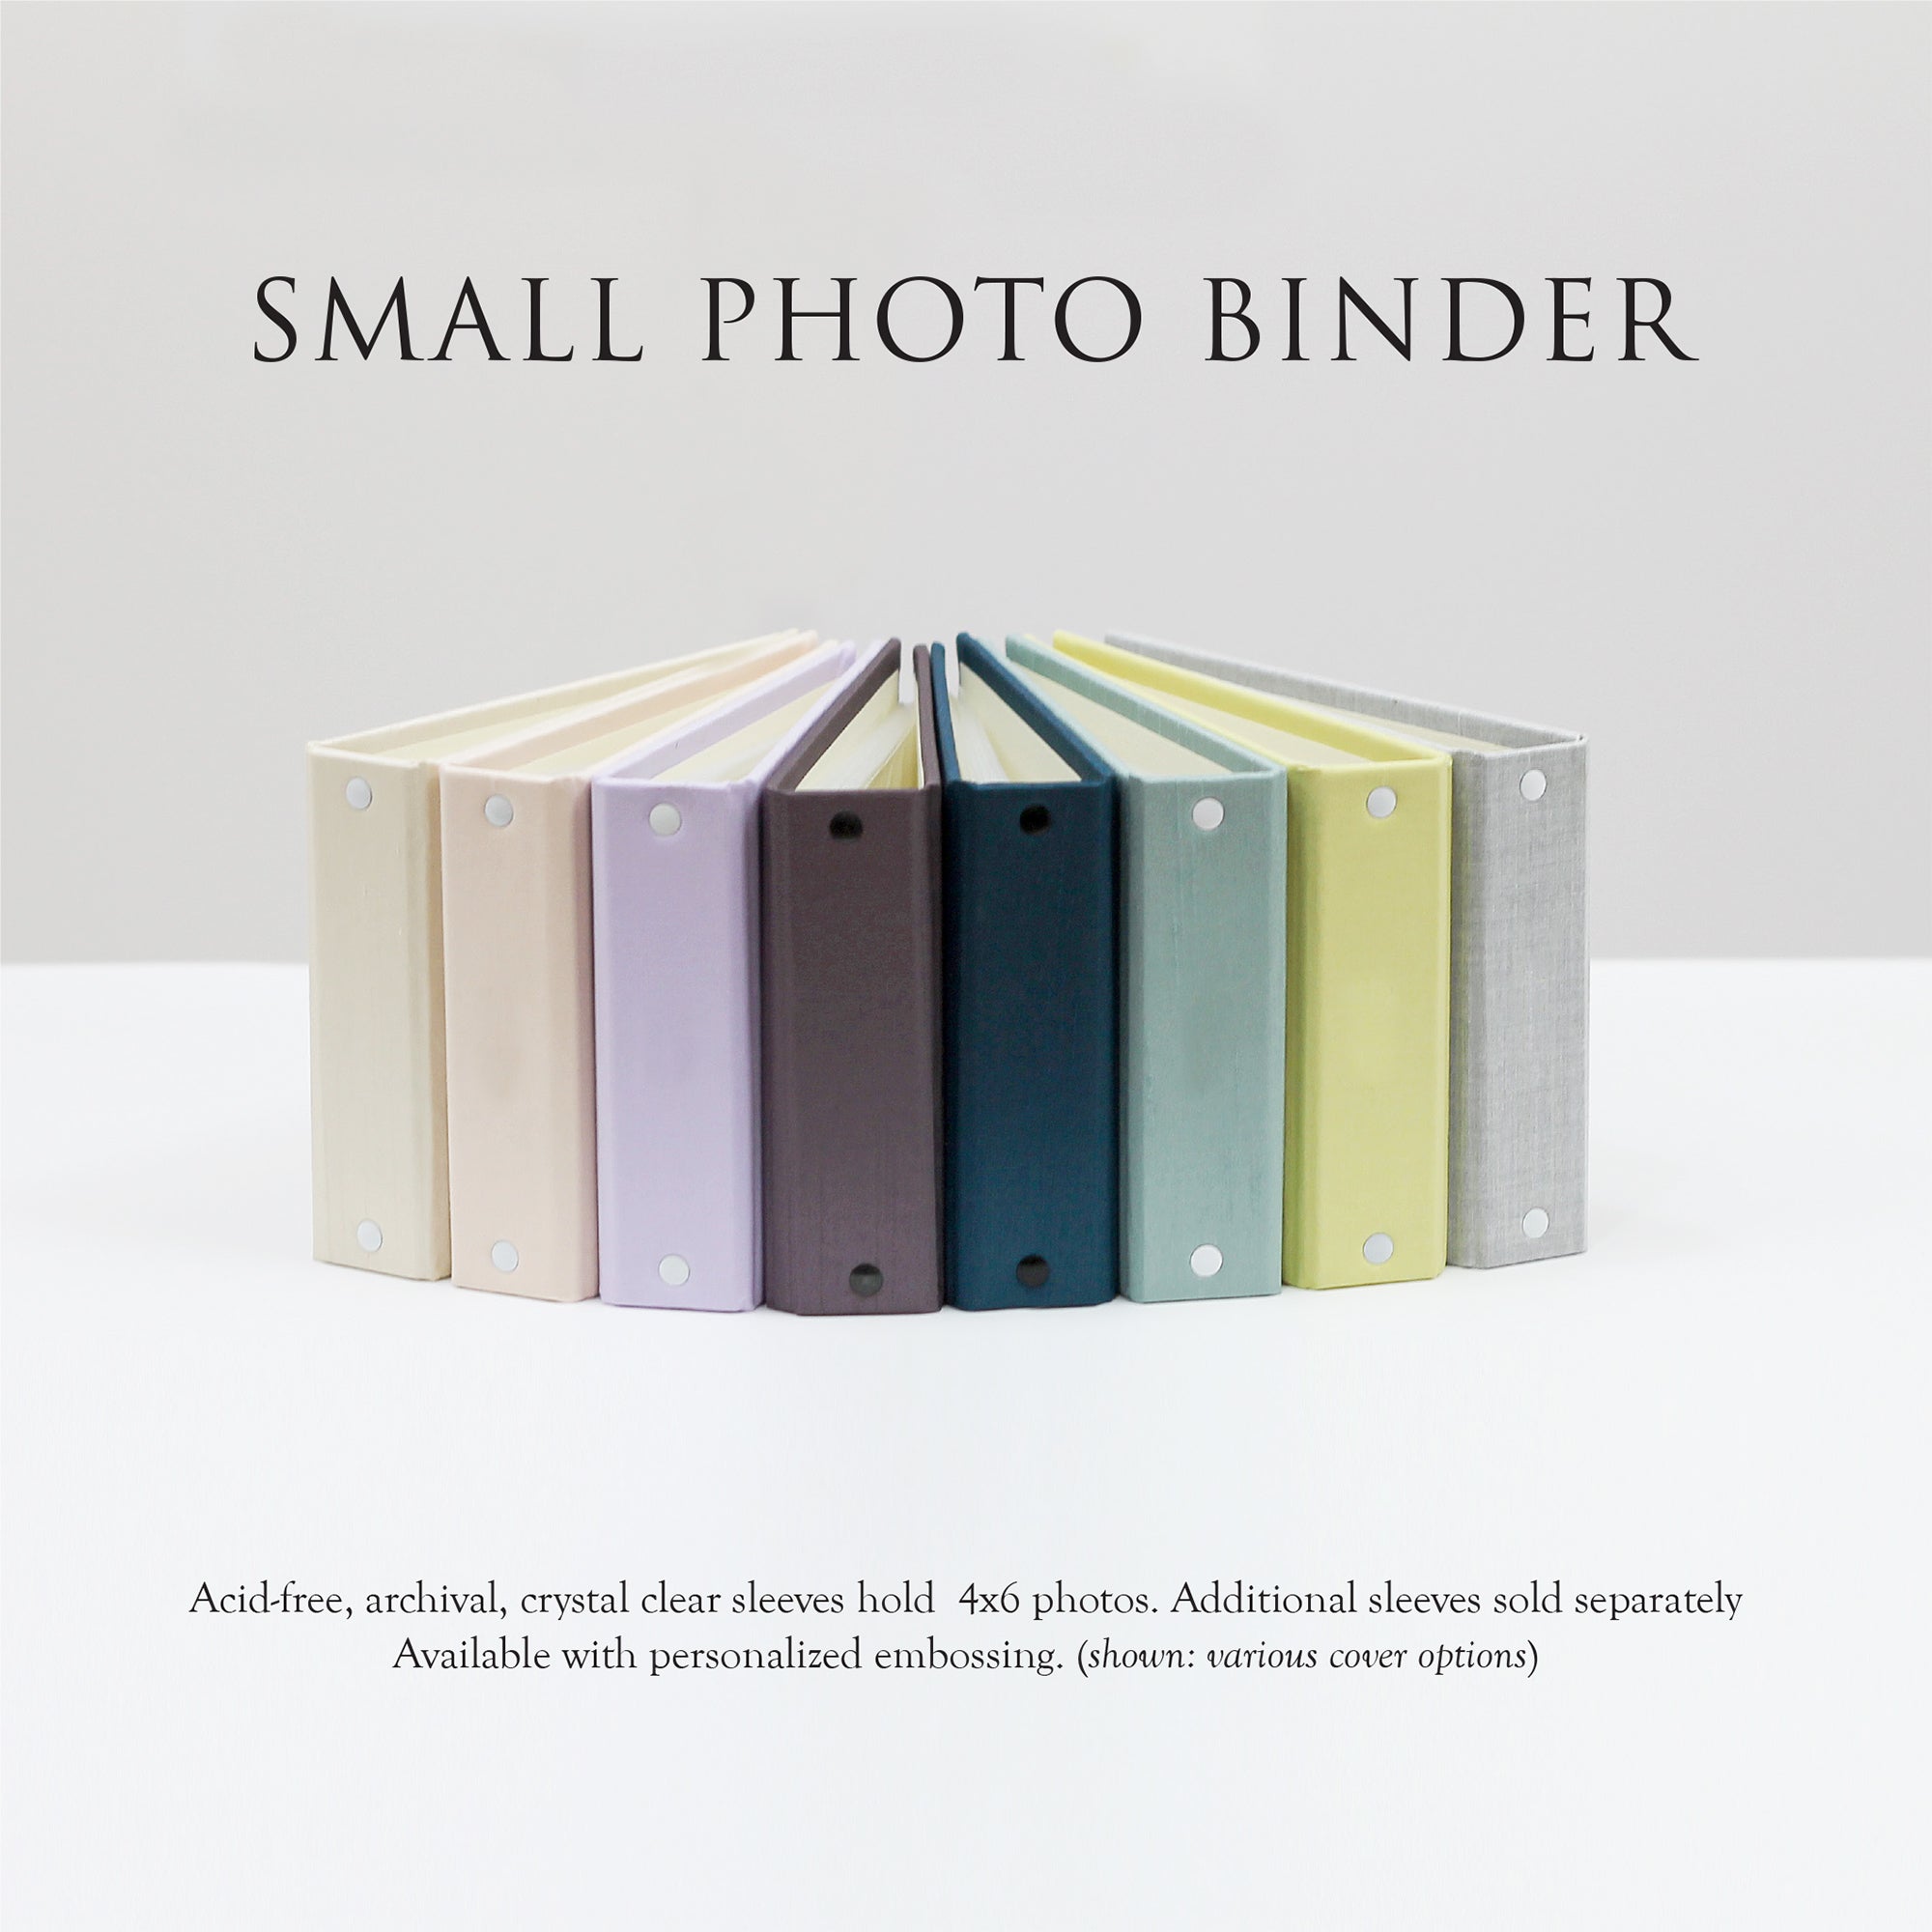 Large Photo Binder For 8x10 Photos, Cover: Natural Linen